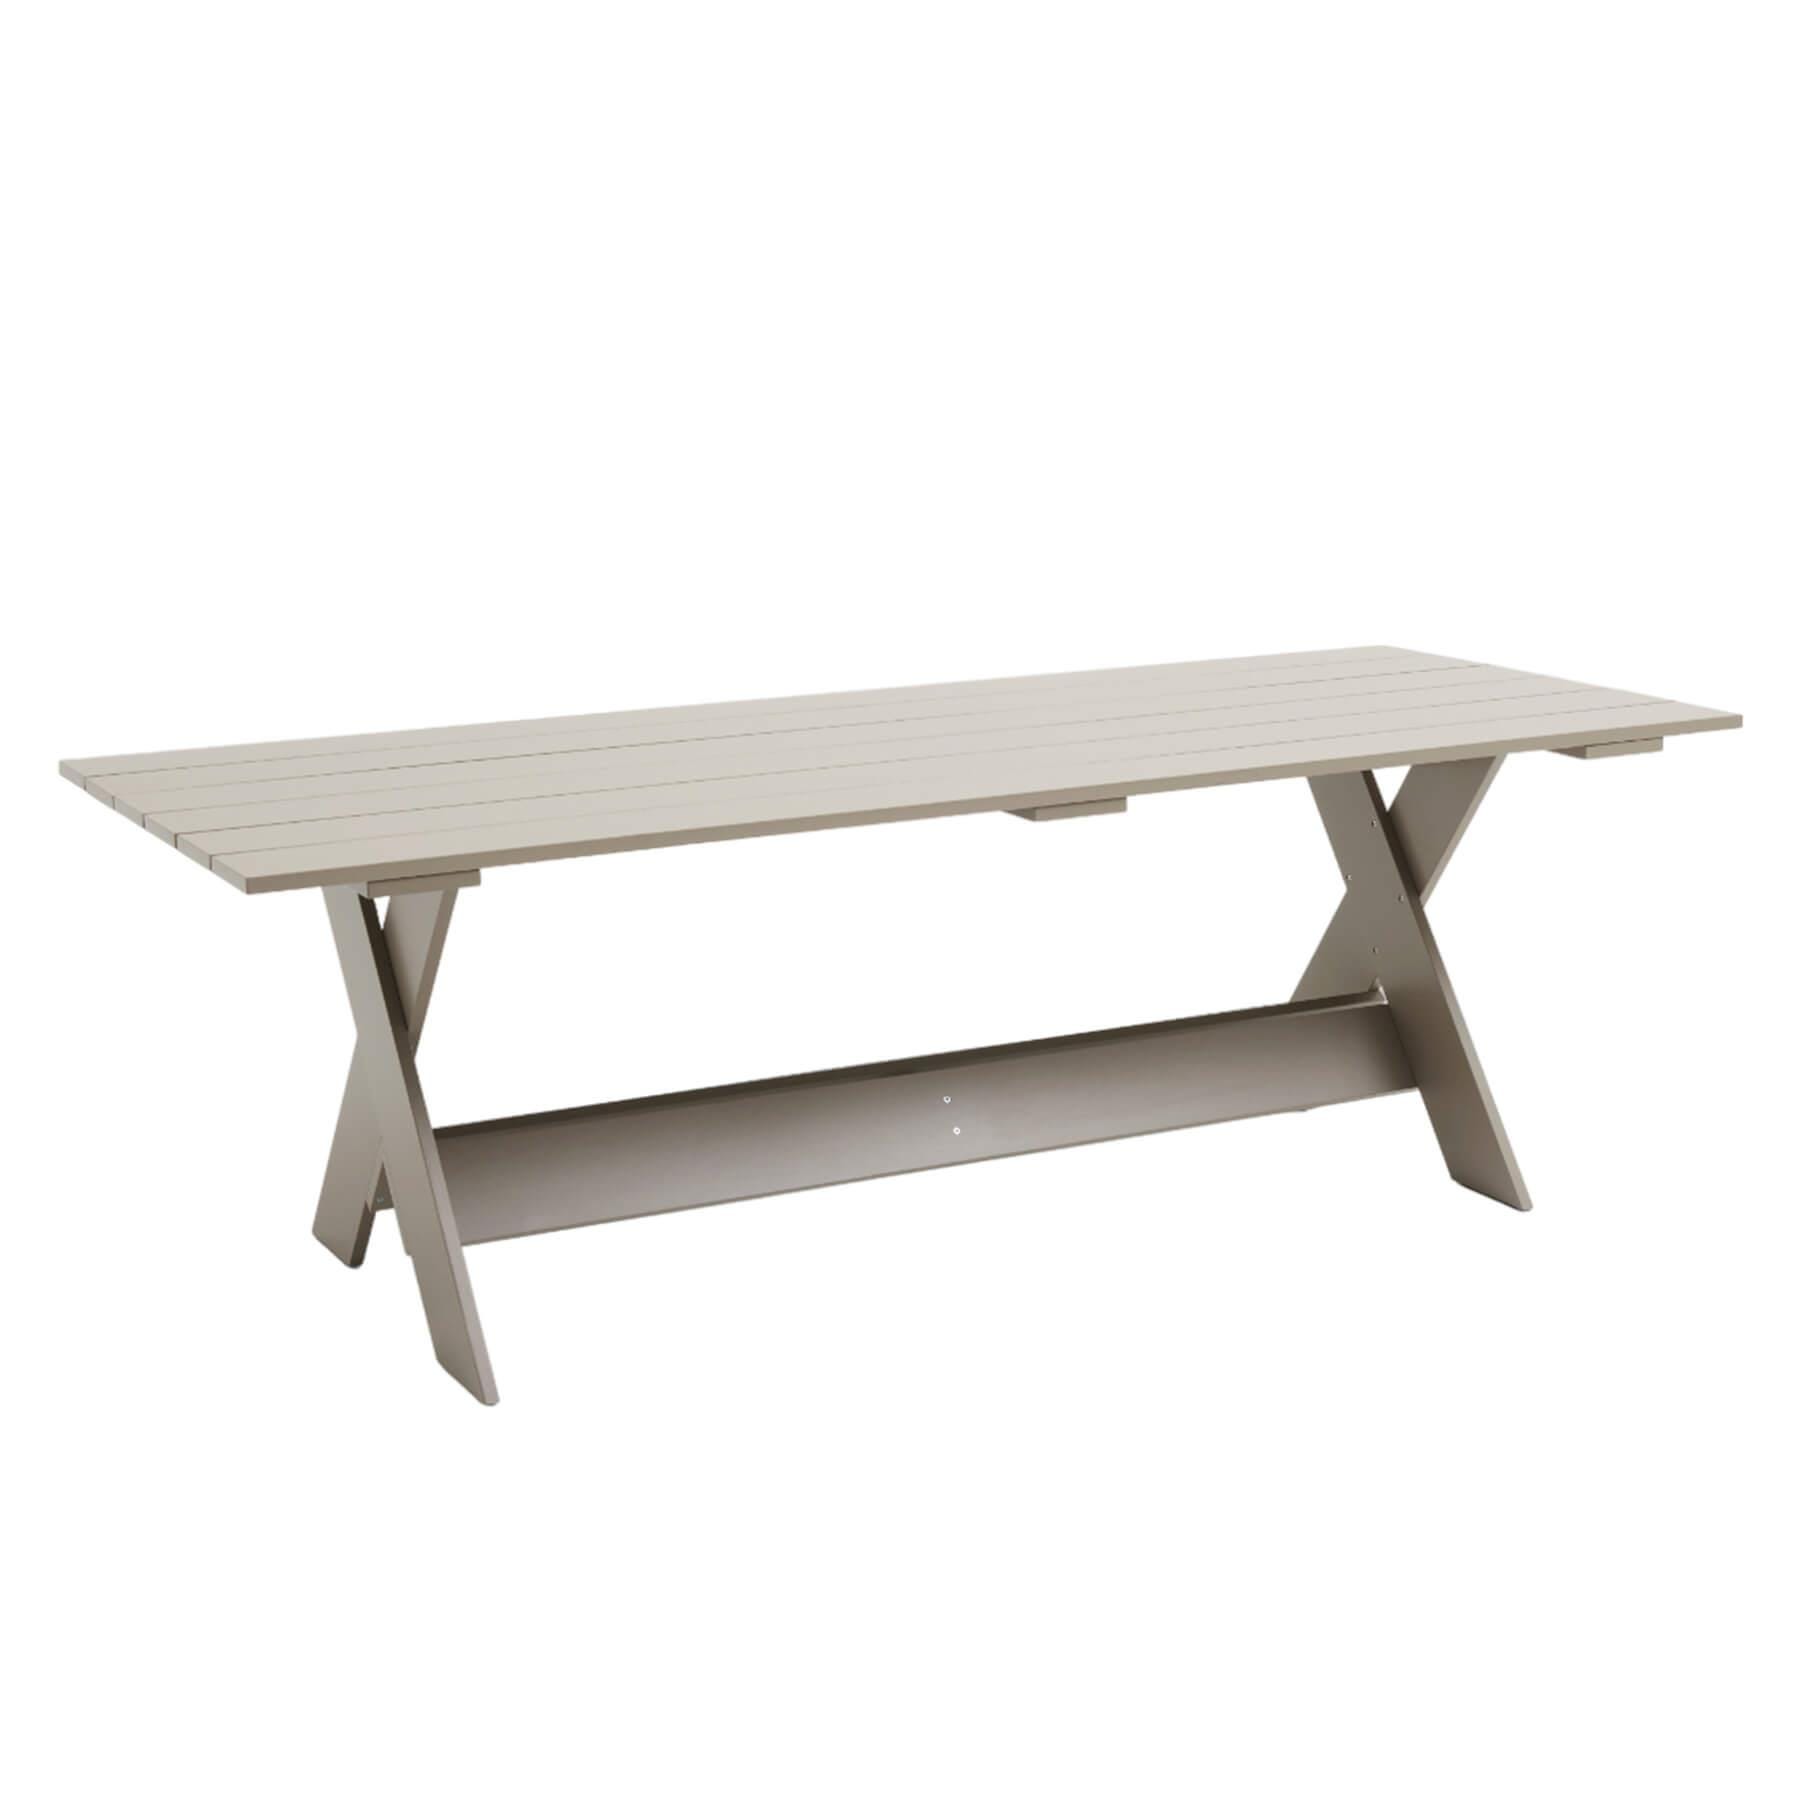 Hay Crate Dining Table 230 X 89 London Fog Grey Designer Furniture From Holloways Of Ludlow